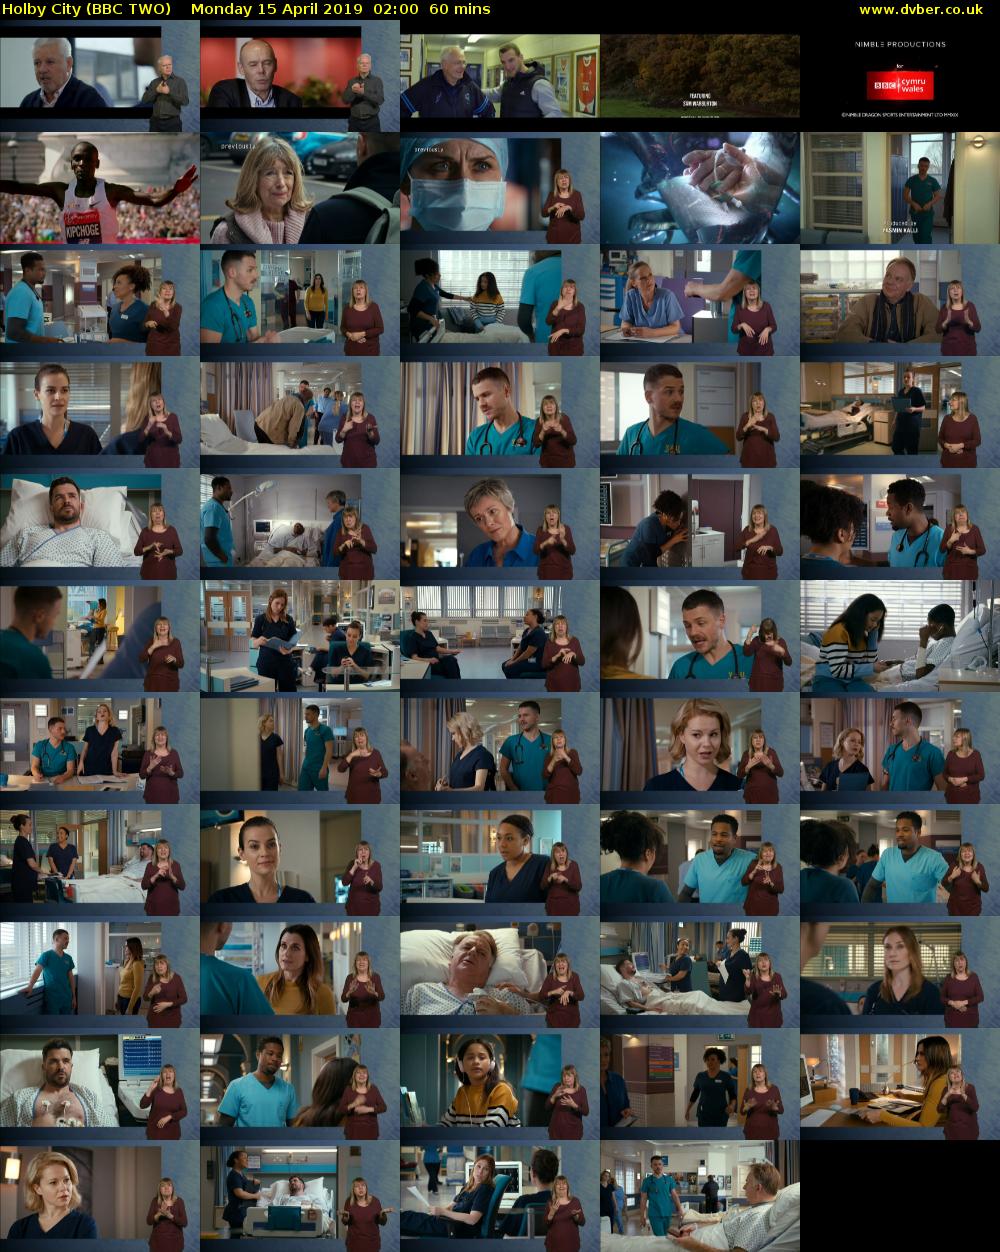 Holby City (BBC TWO) Monday 15 April 2019 02:00 - 03:00